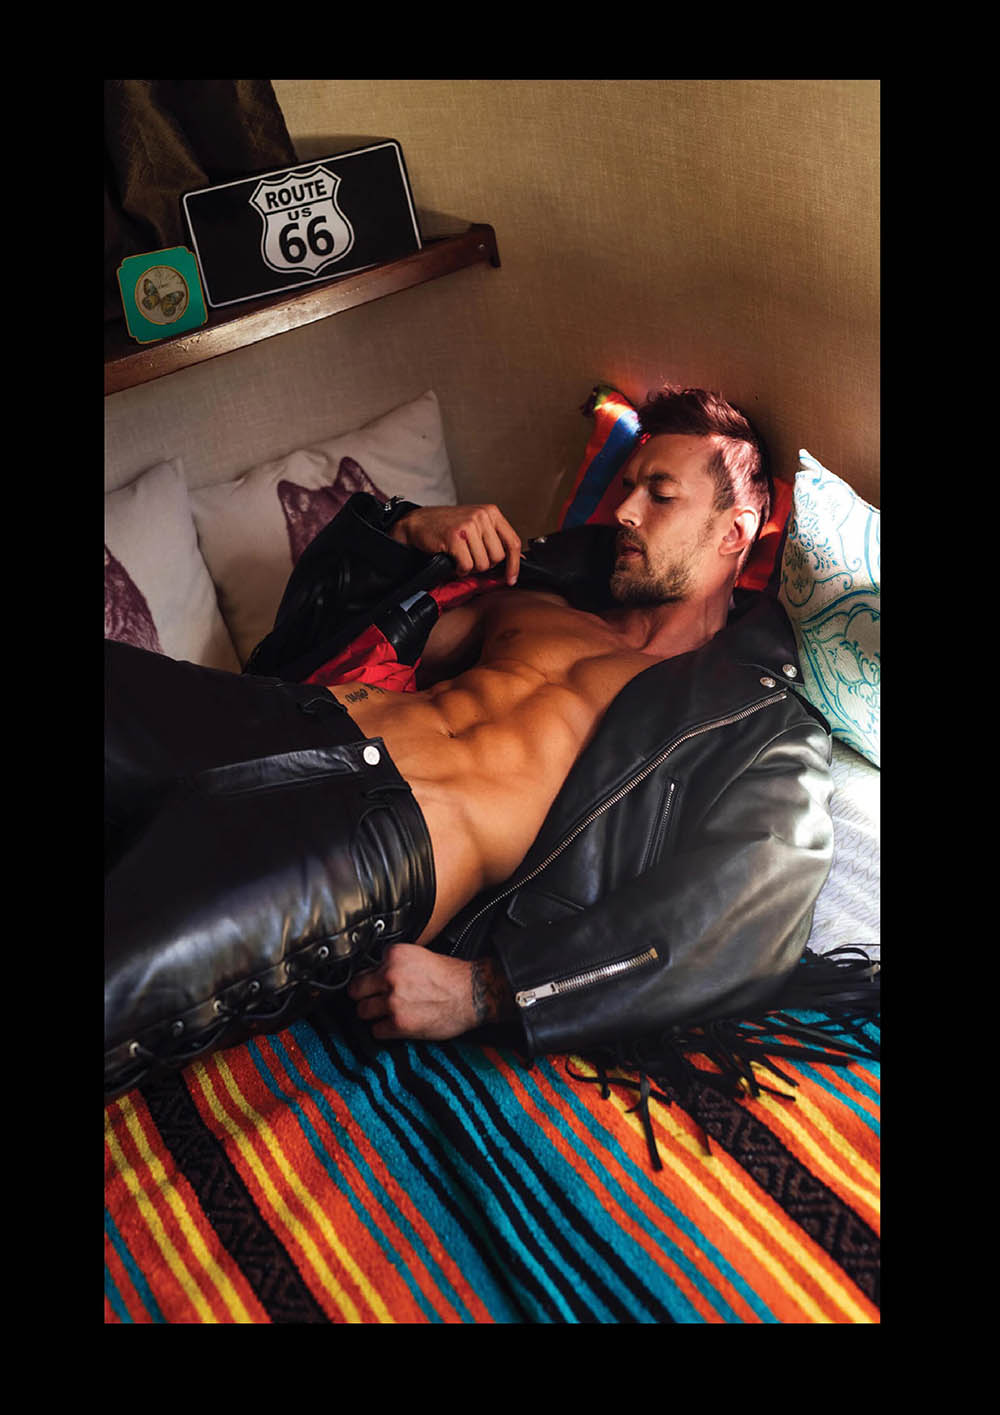 Christian Hogue by Taylor Miller for Attitude Magazine Summer 2020